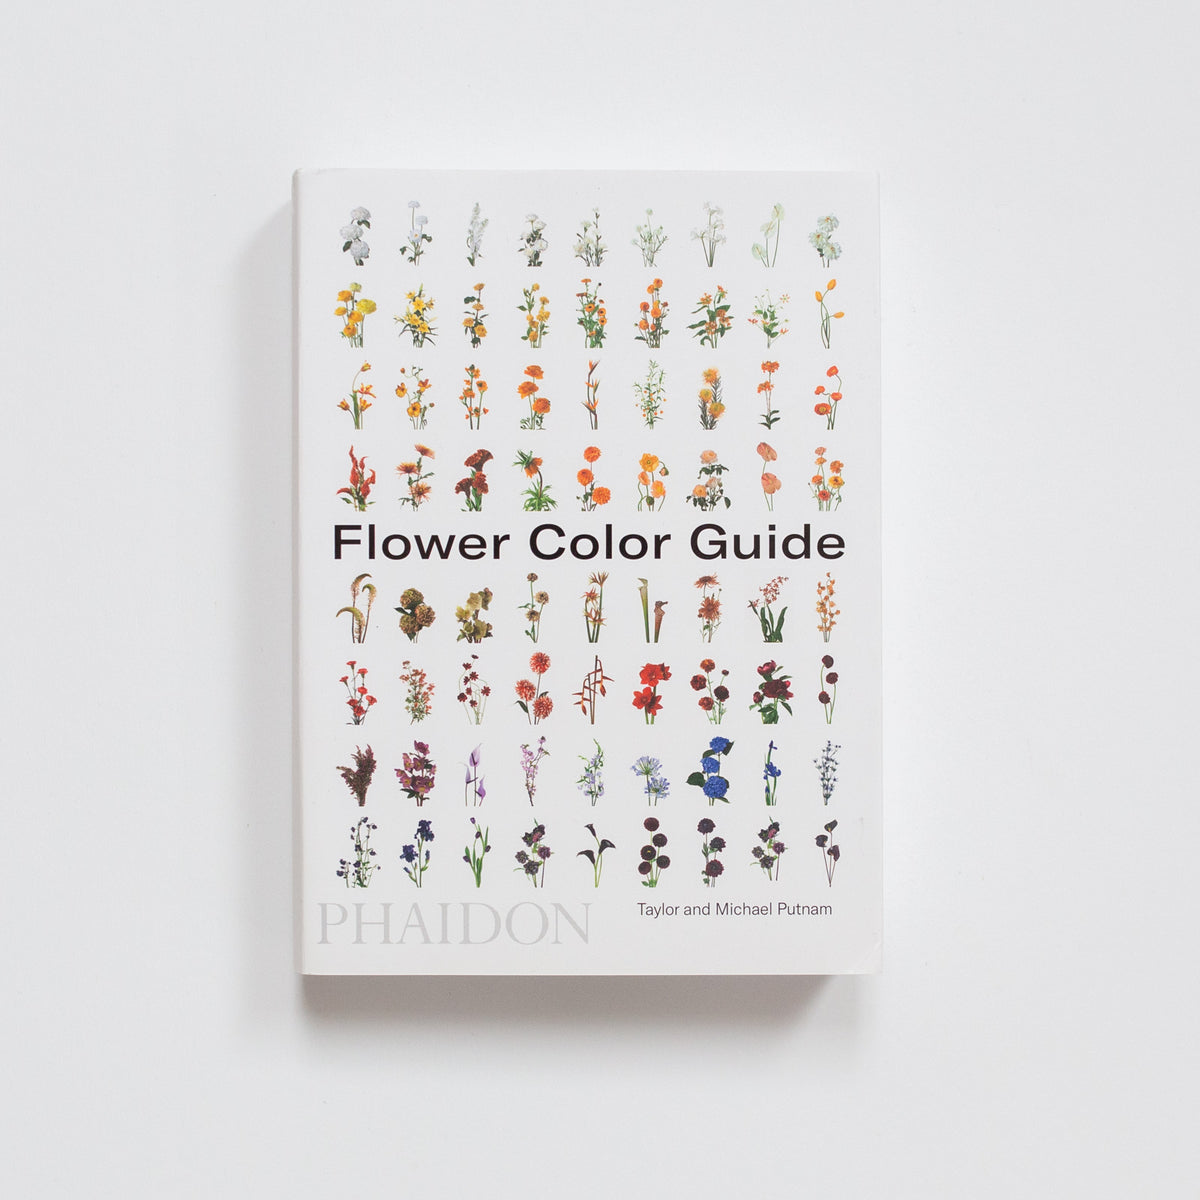 Flower Color Guide by Taylor and Michael Putnam